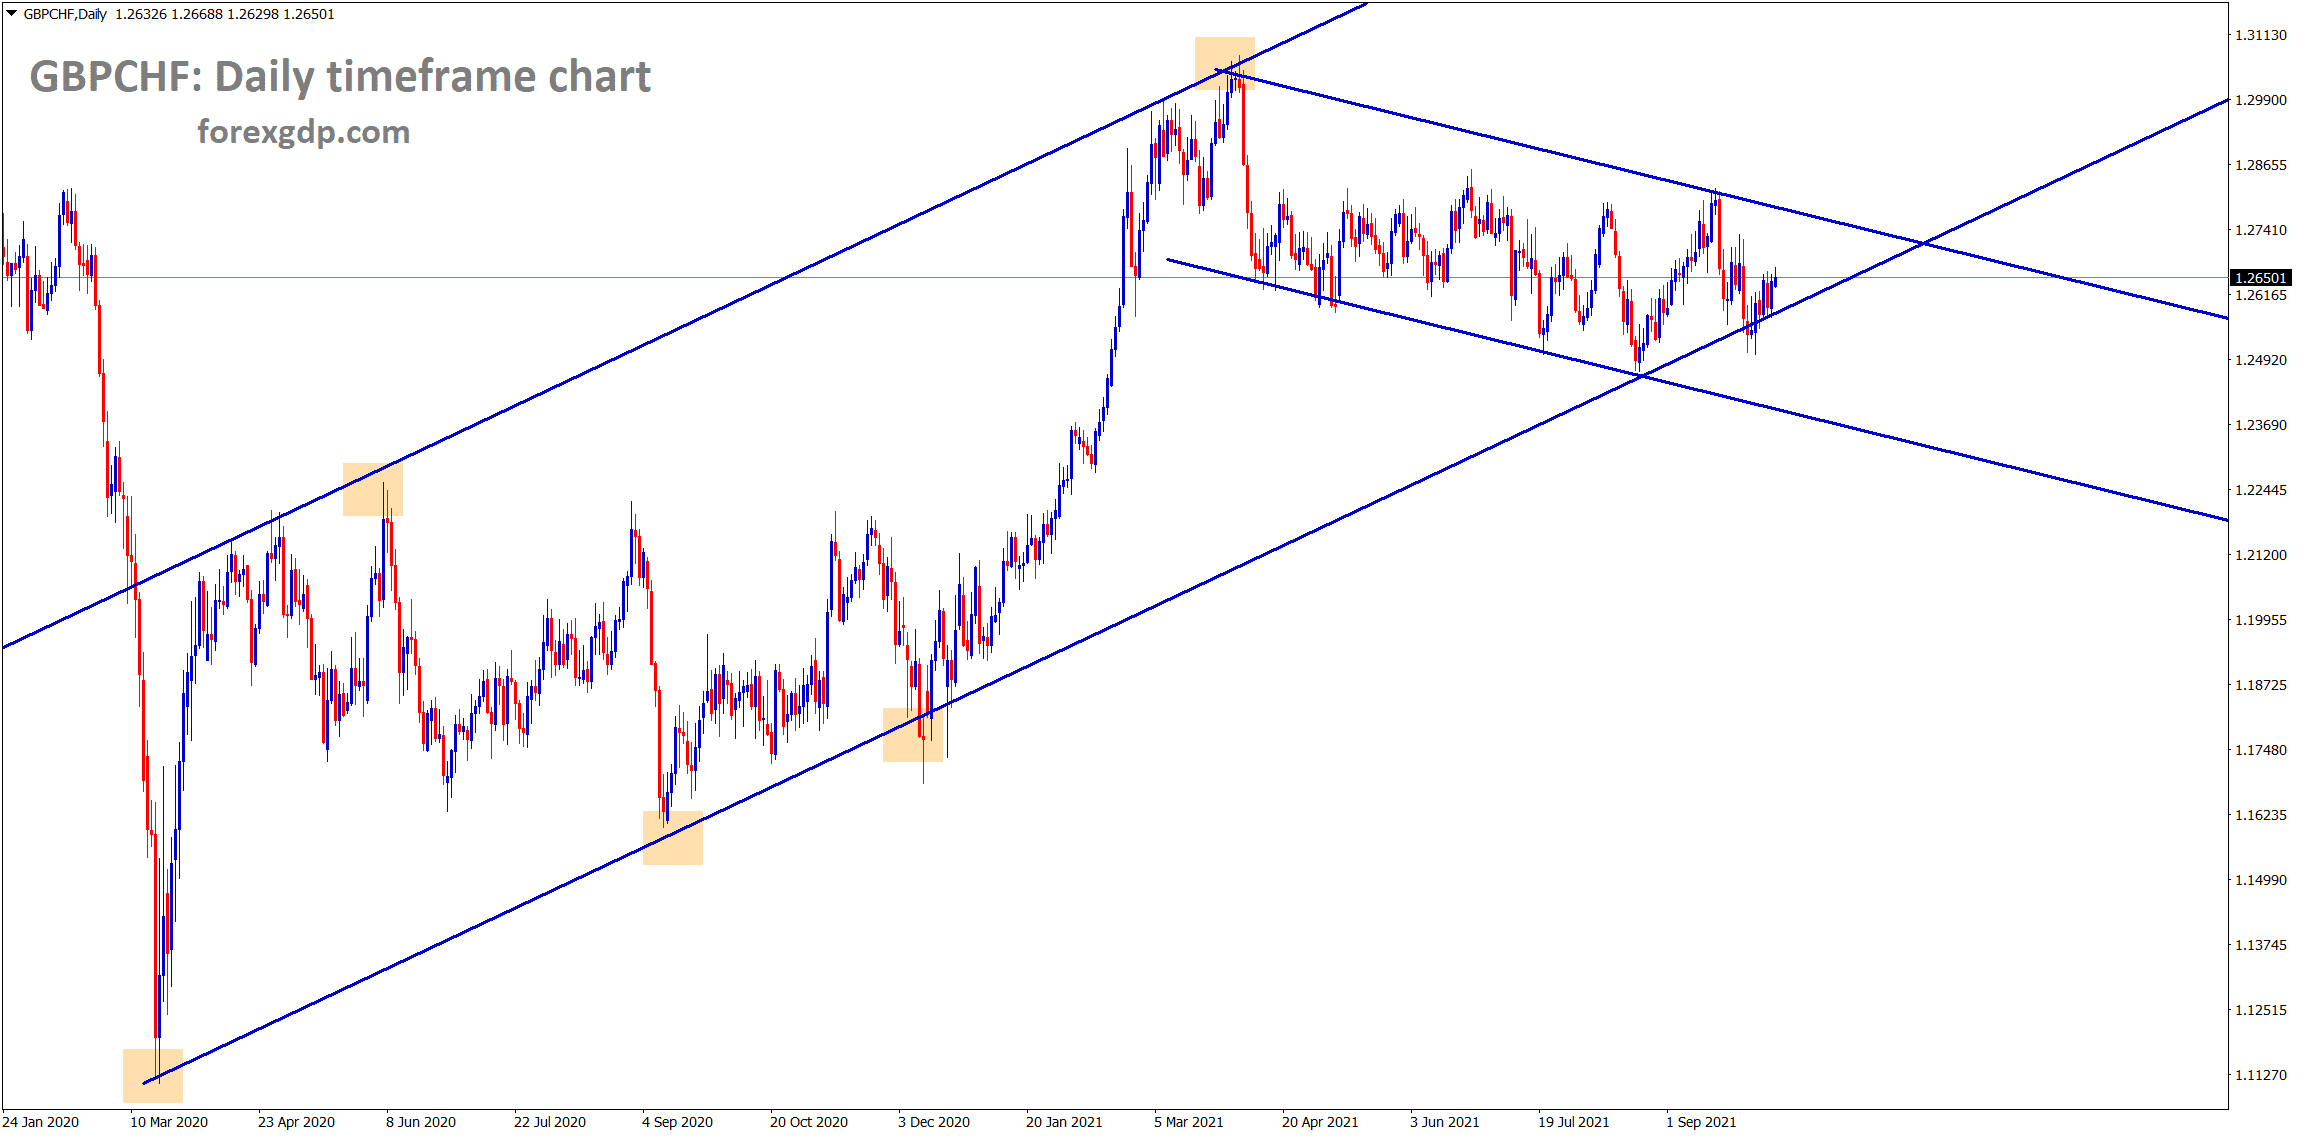 GBPCHF is moving in an Uptrend line for a long time